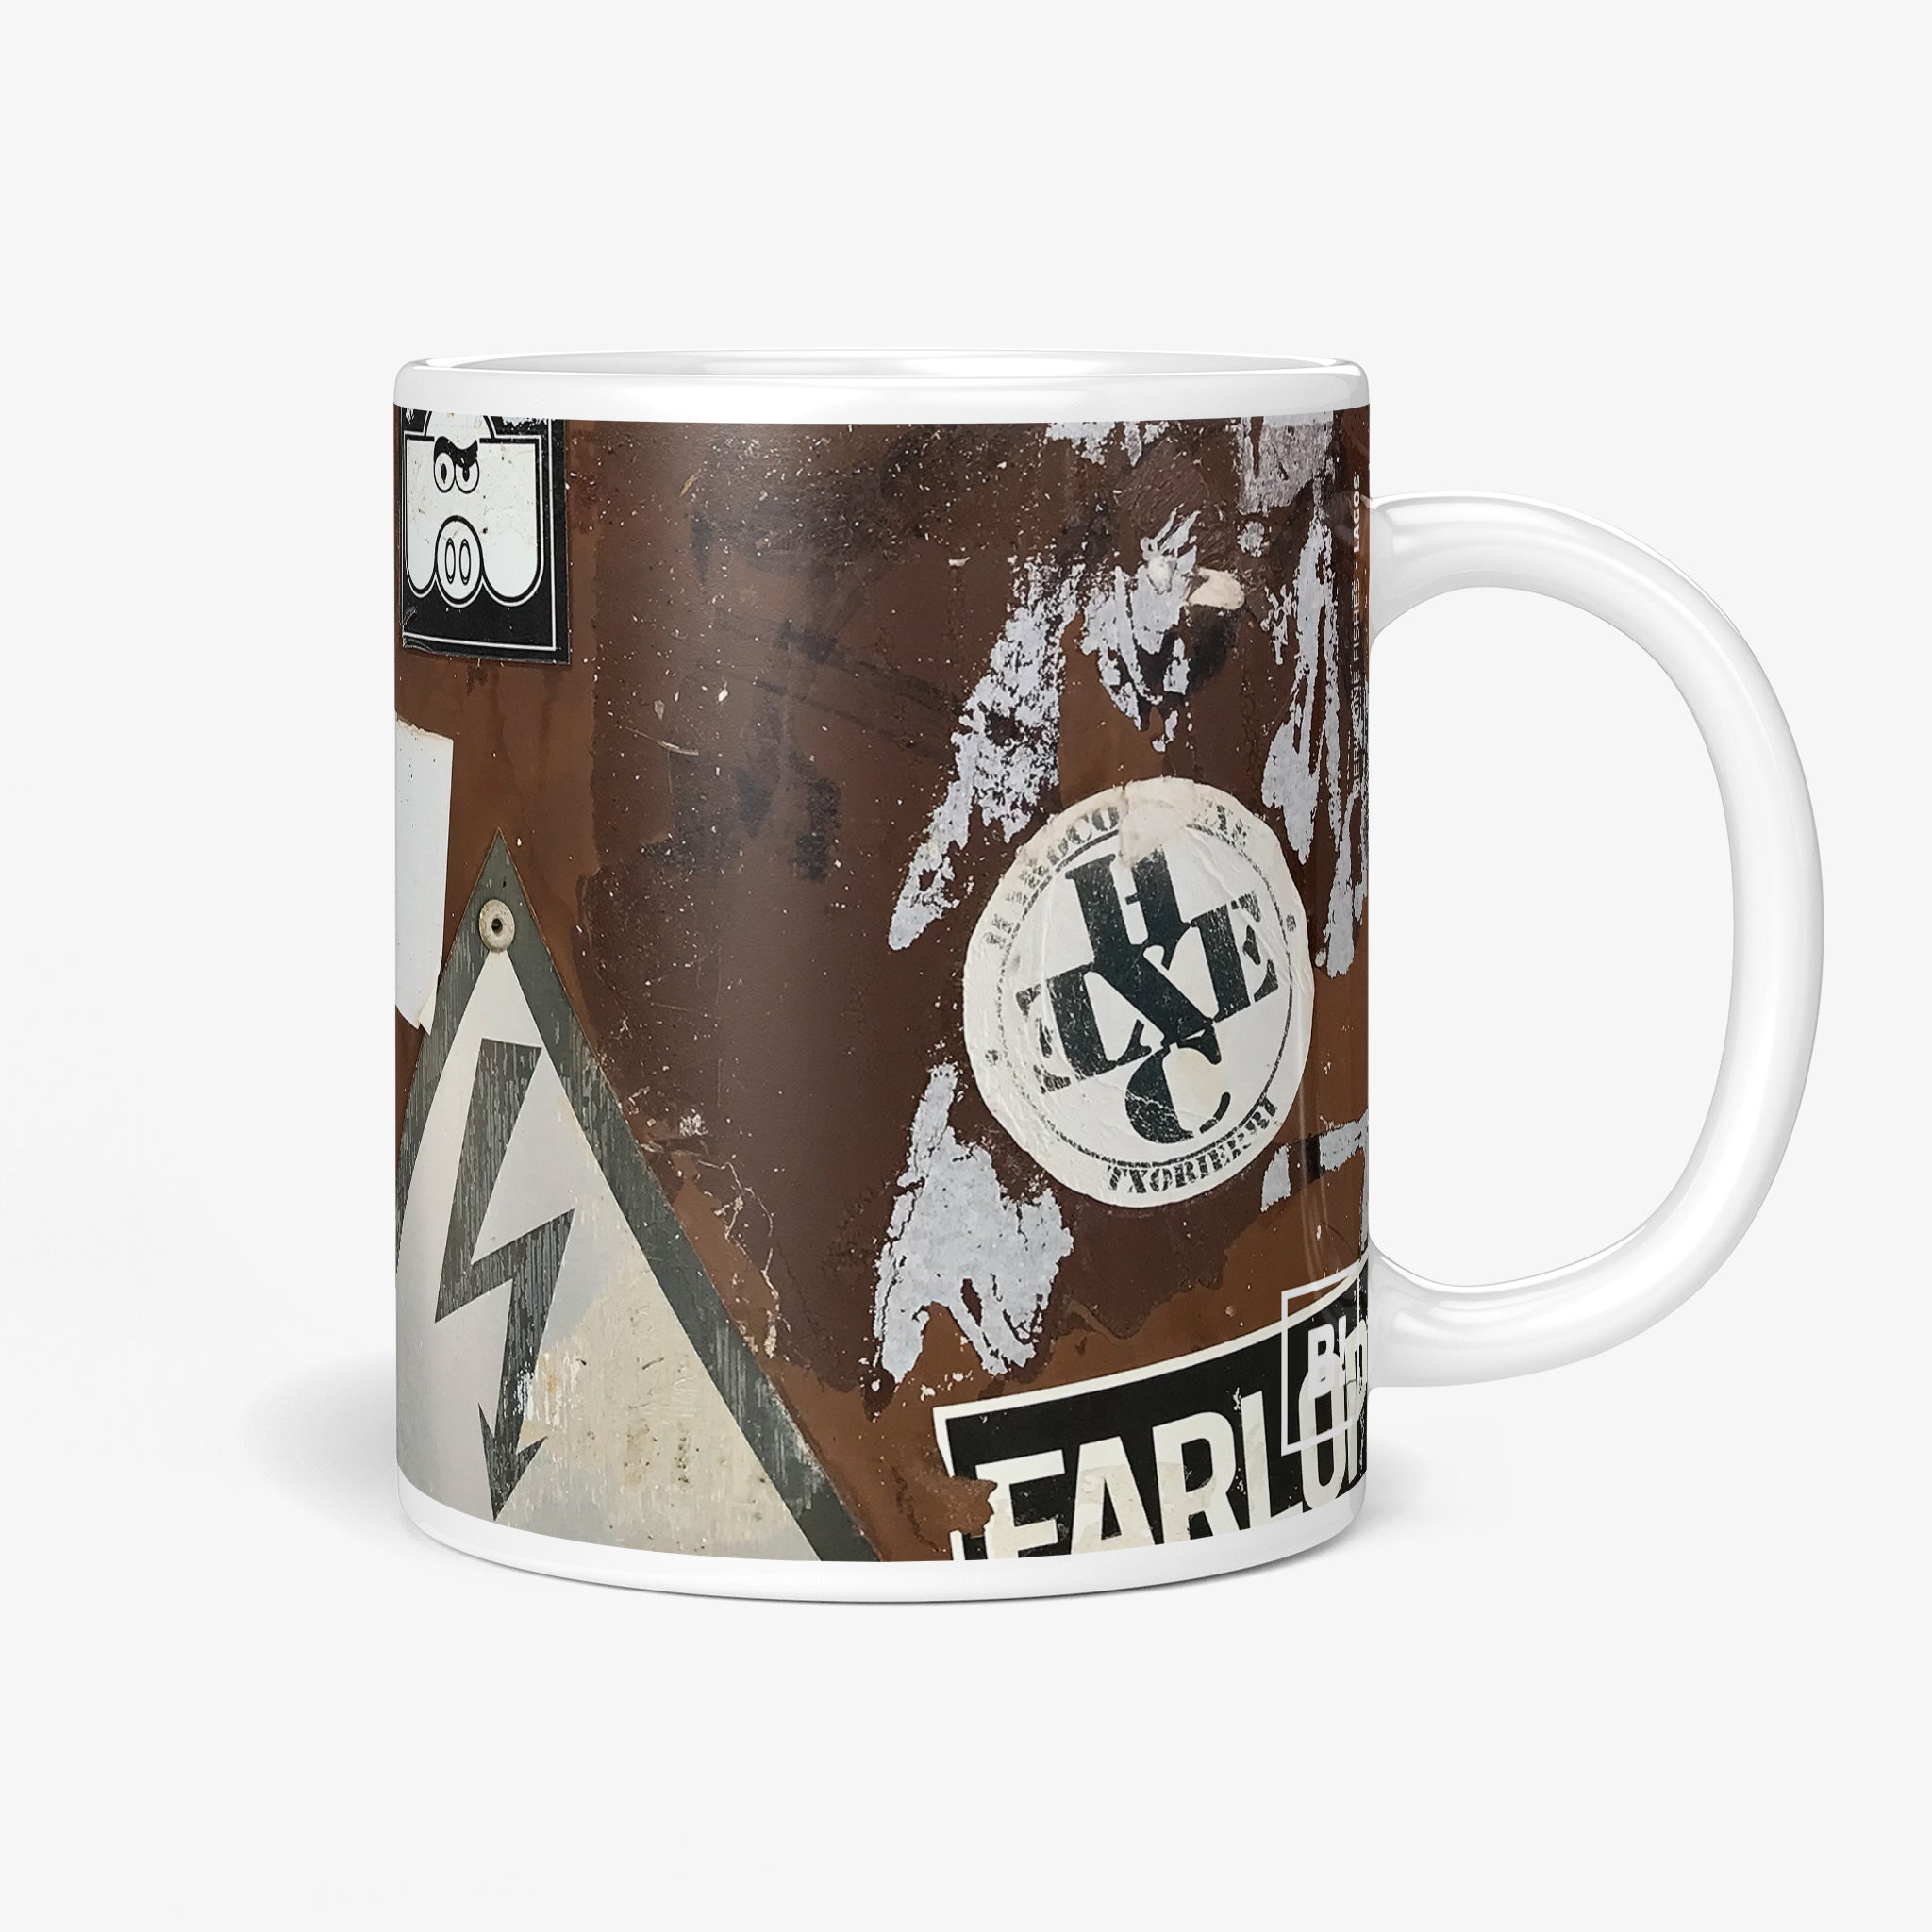 Be inspired by our Urban Art Coffee Mug – Merioone Fishes from Lagos. The mug has a capacity of 11 oz and the handle on the right side. The design of the mug captures the essence of the street and gives the mug an authentic urban feel, making it resemble a piece of street art itself.